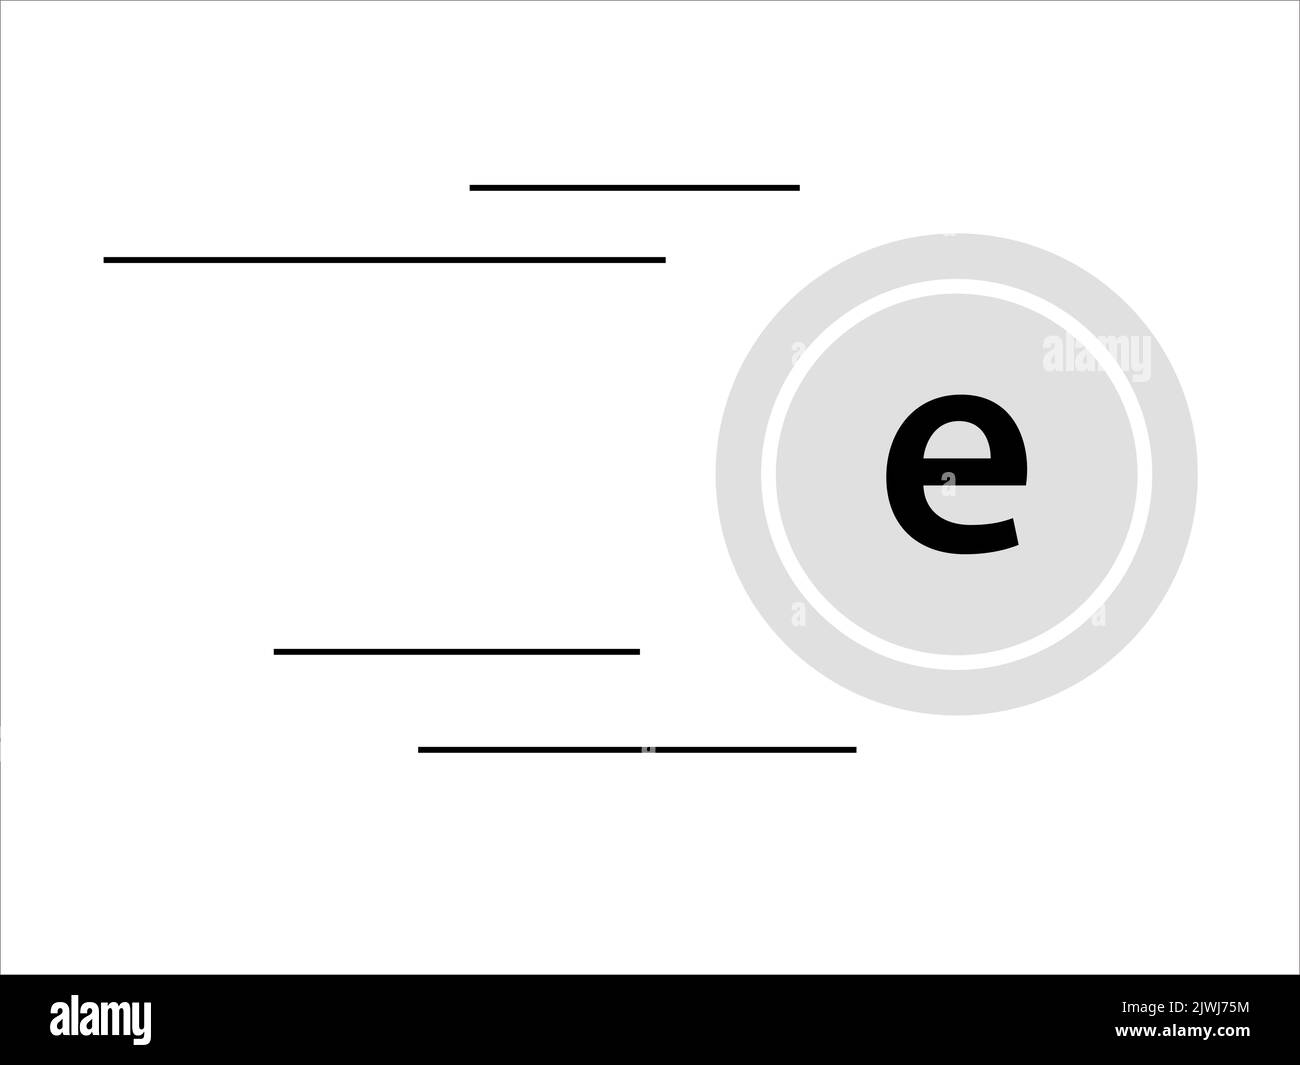 Vector science model of Electron. Flight icon with fast speed effect   Vector symbol of electron molecule on isolated background. Stock Vector